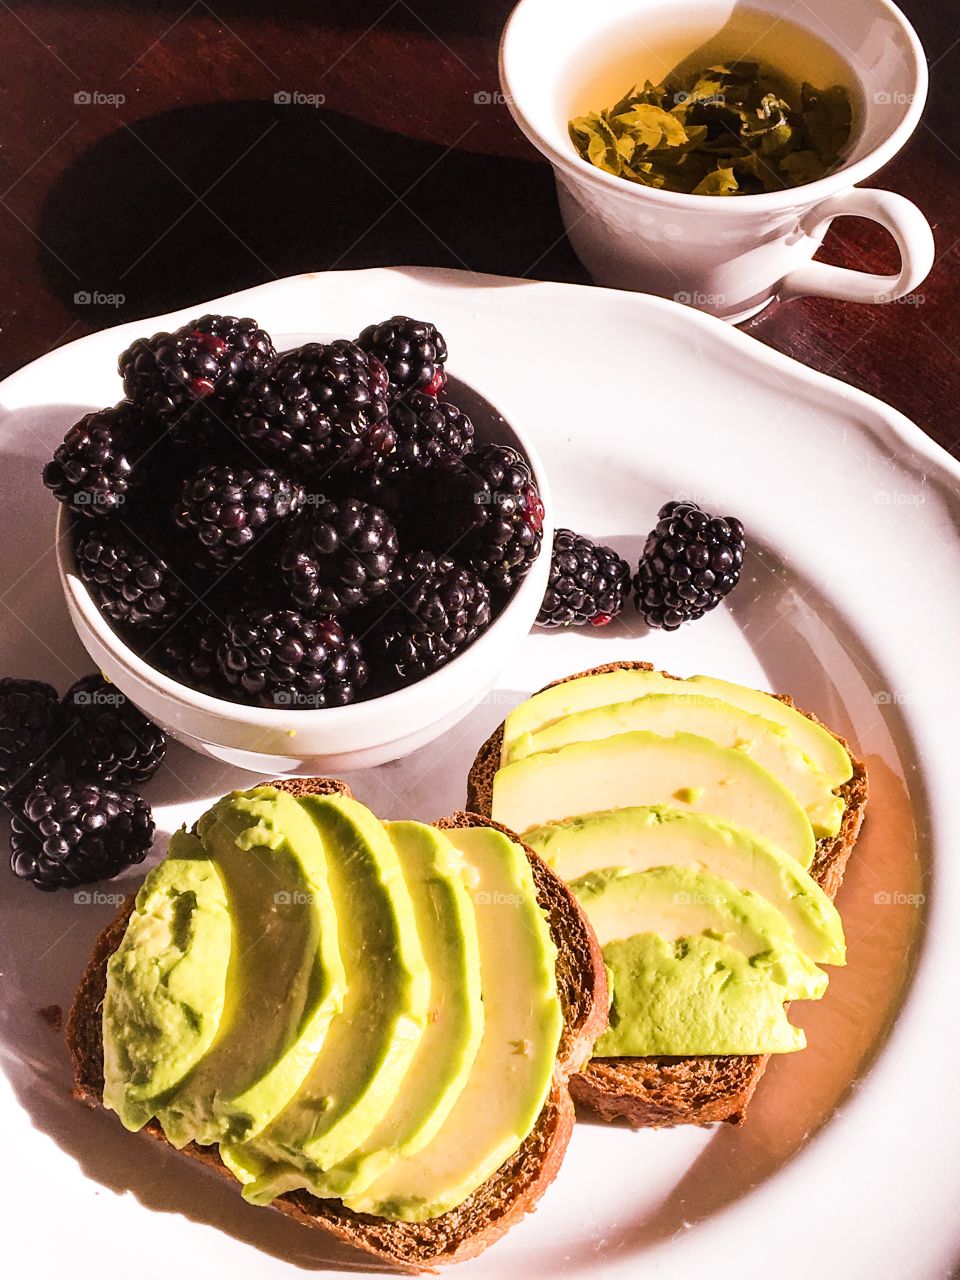 Avocado toast with blackberries and green tea